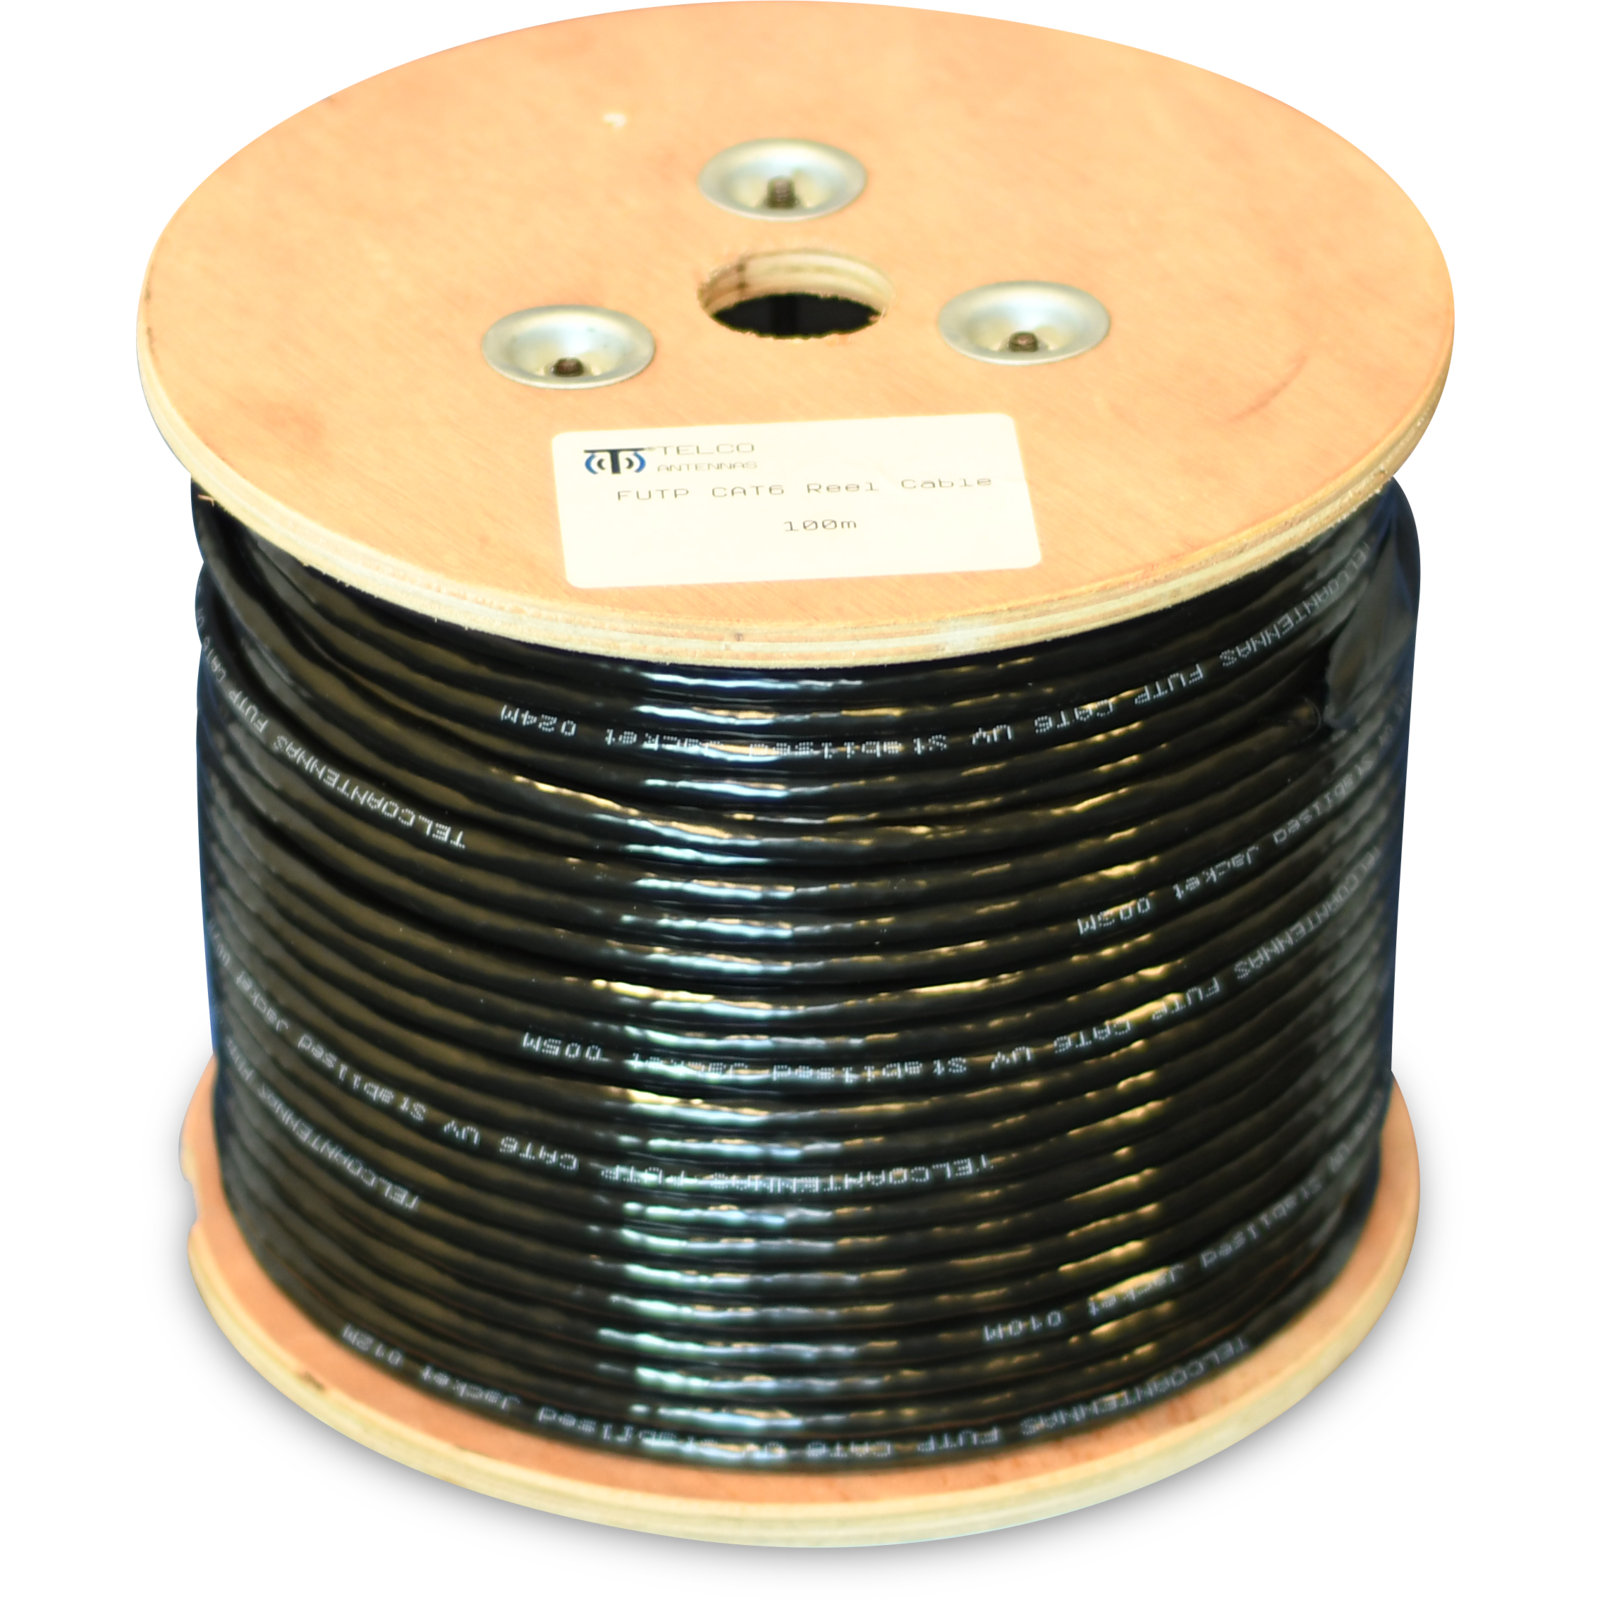 Telco WildCat Cat6 OutdoorF/UTP Shielded Ethernet Cable Spool - 305m